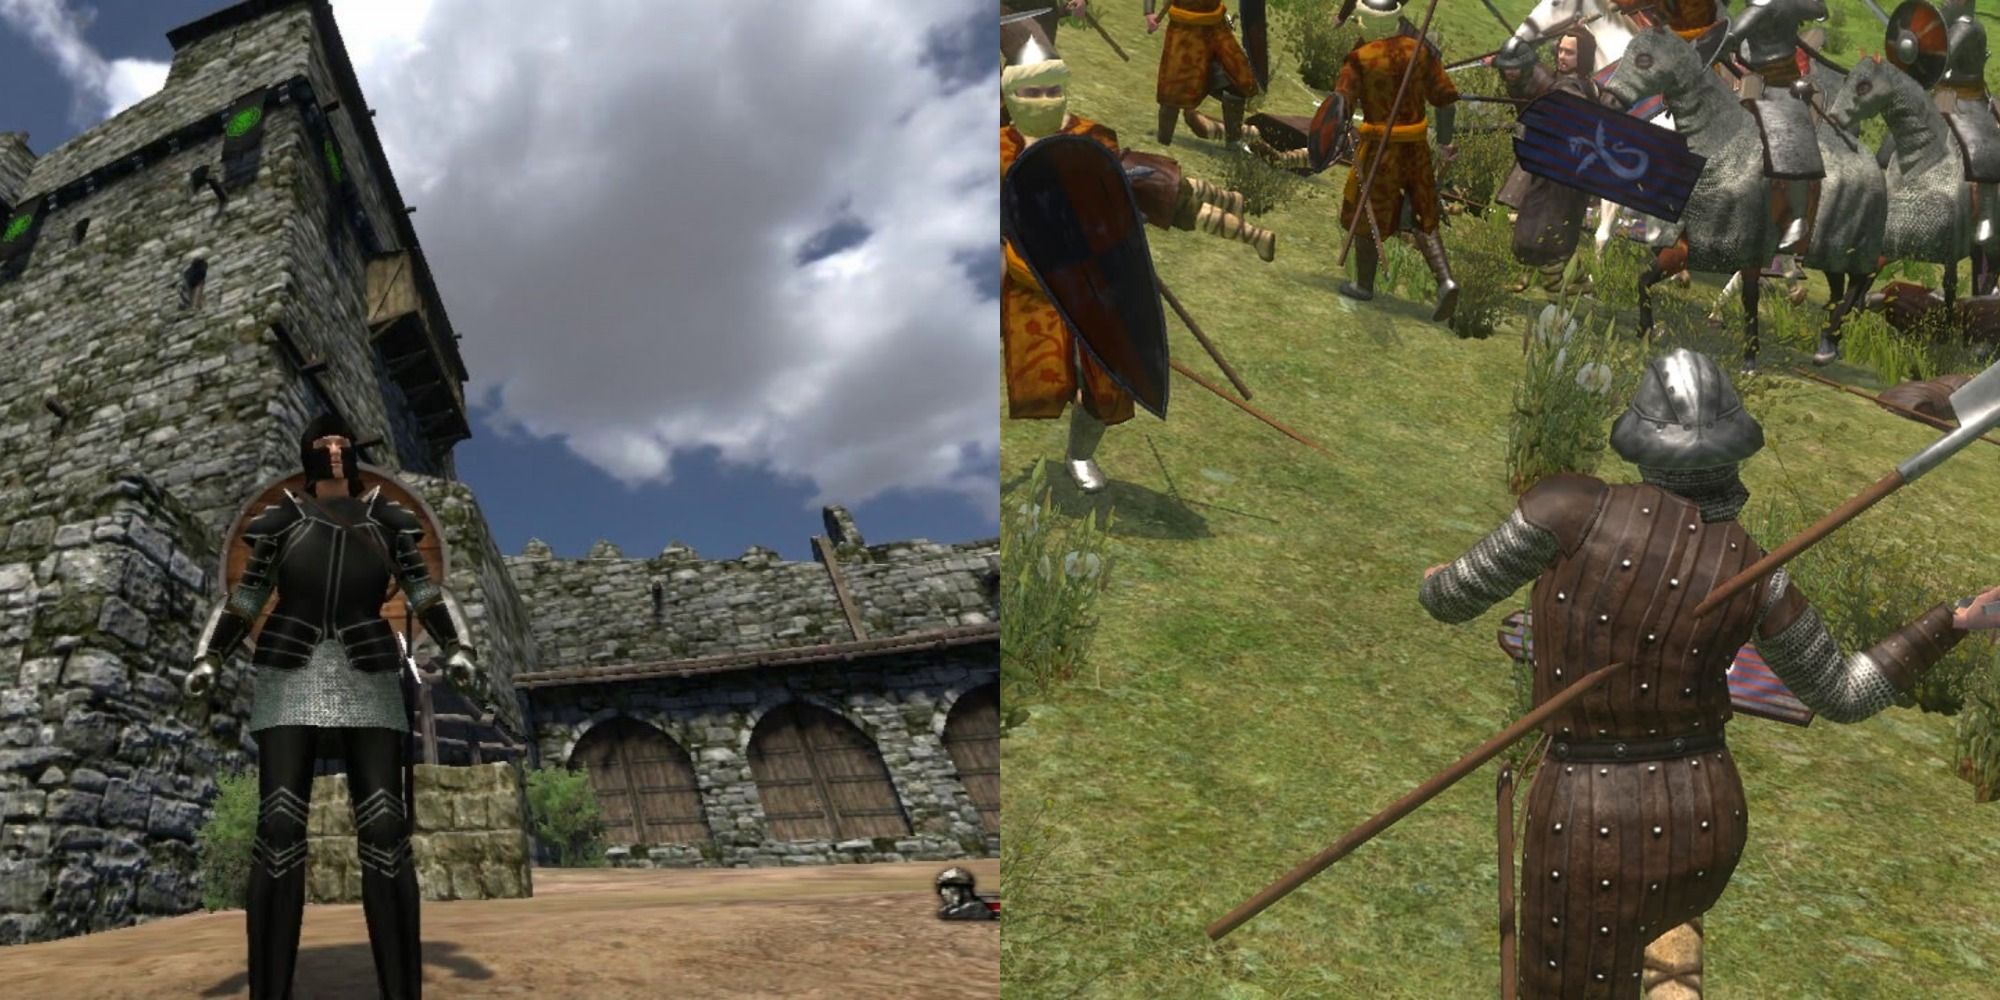 mount and blade raiding villages